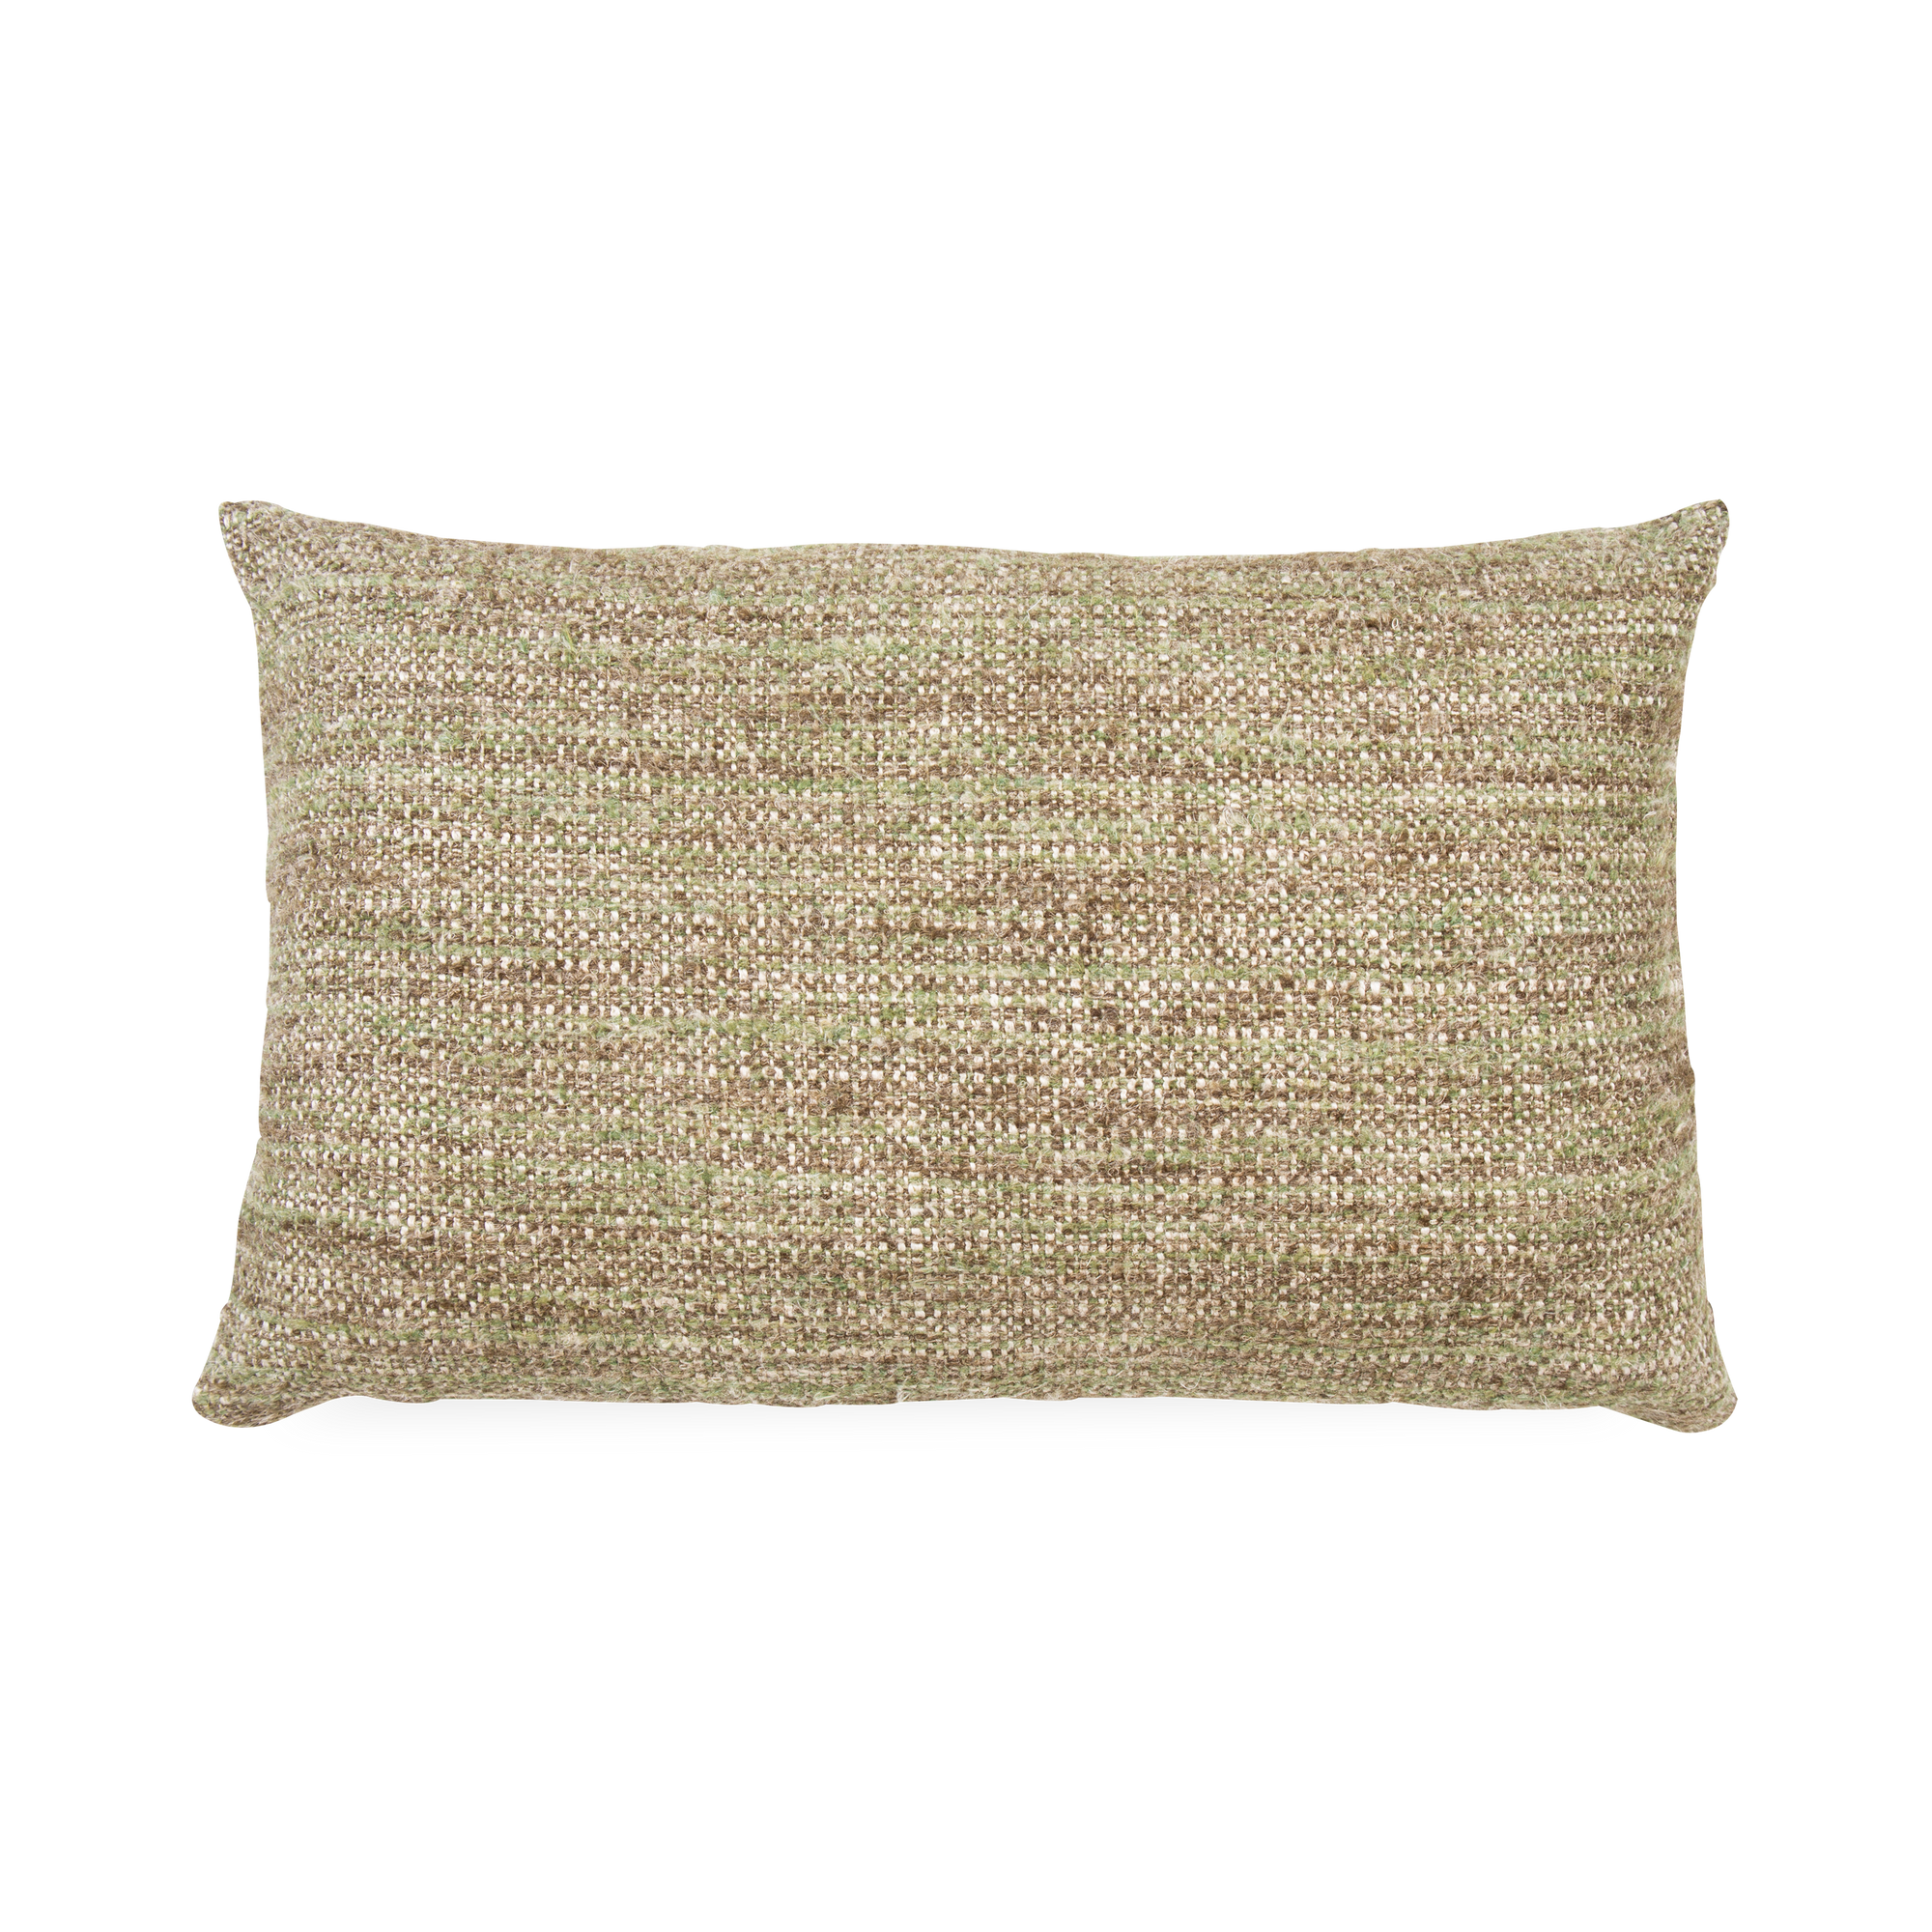 Woven in Belgium using traditional weaving techniques, the Woven Slub Pillow combines Belgian linen with soft viscose.